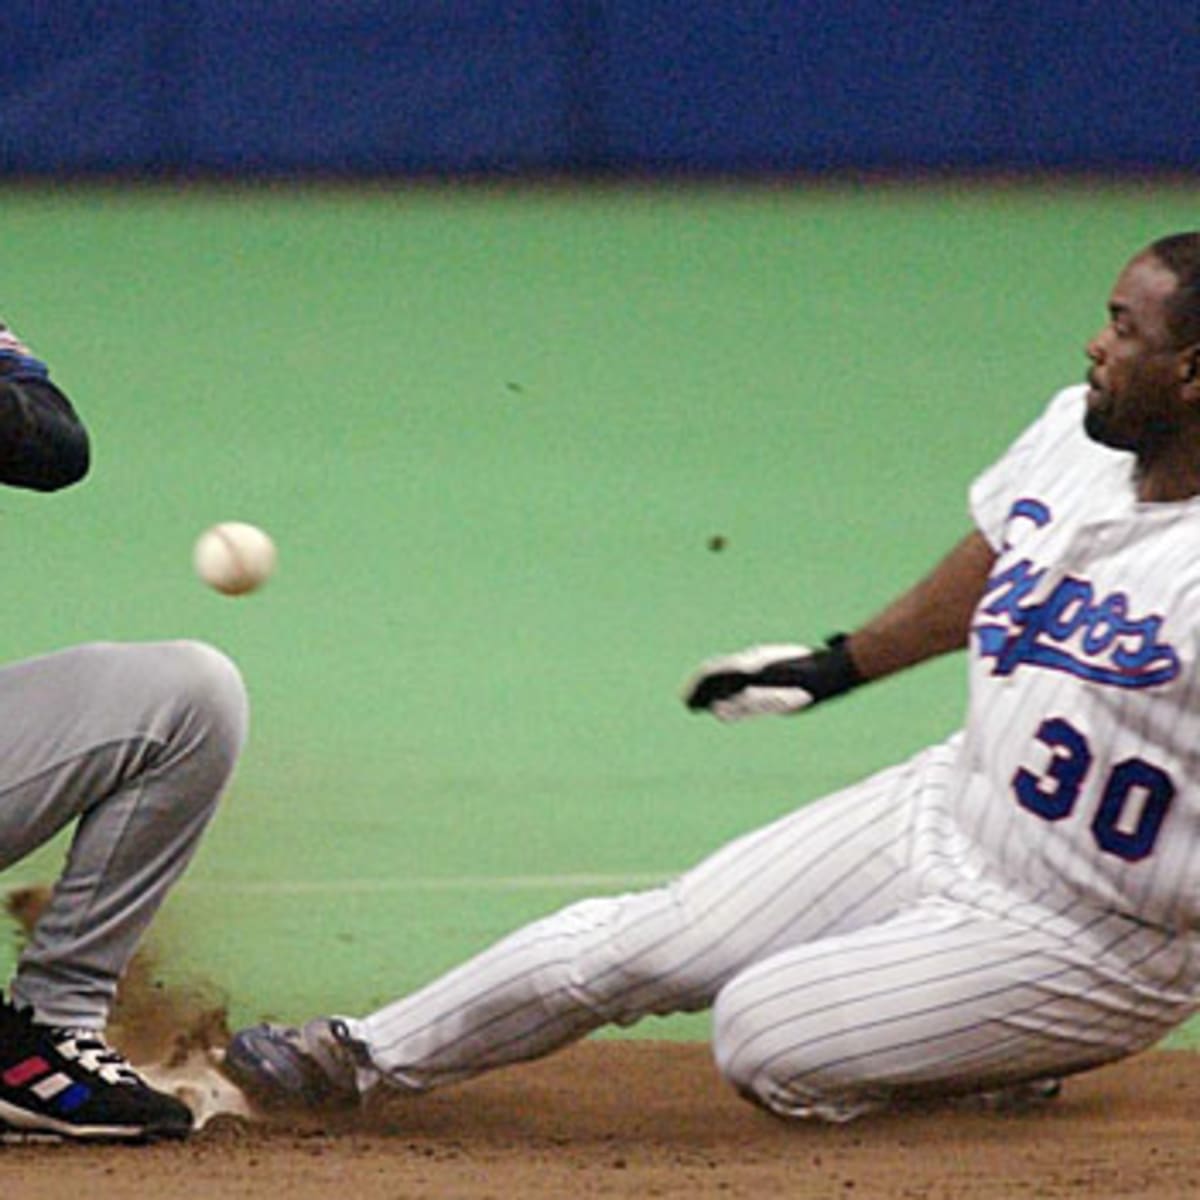 Tim Raines, Who Briefly Played With Orioles, Elected To